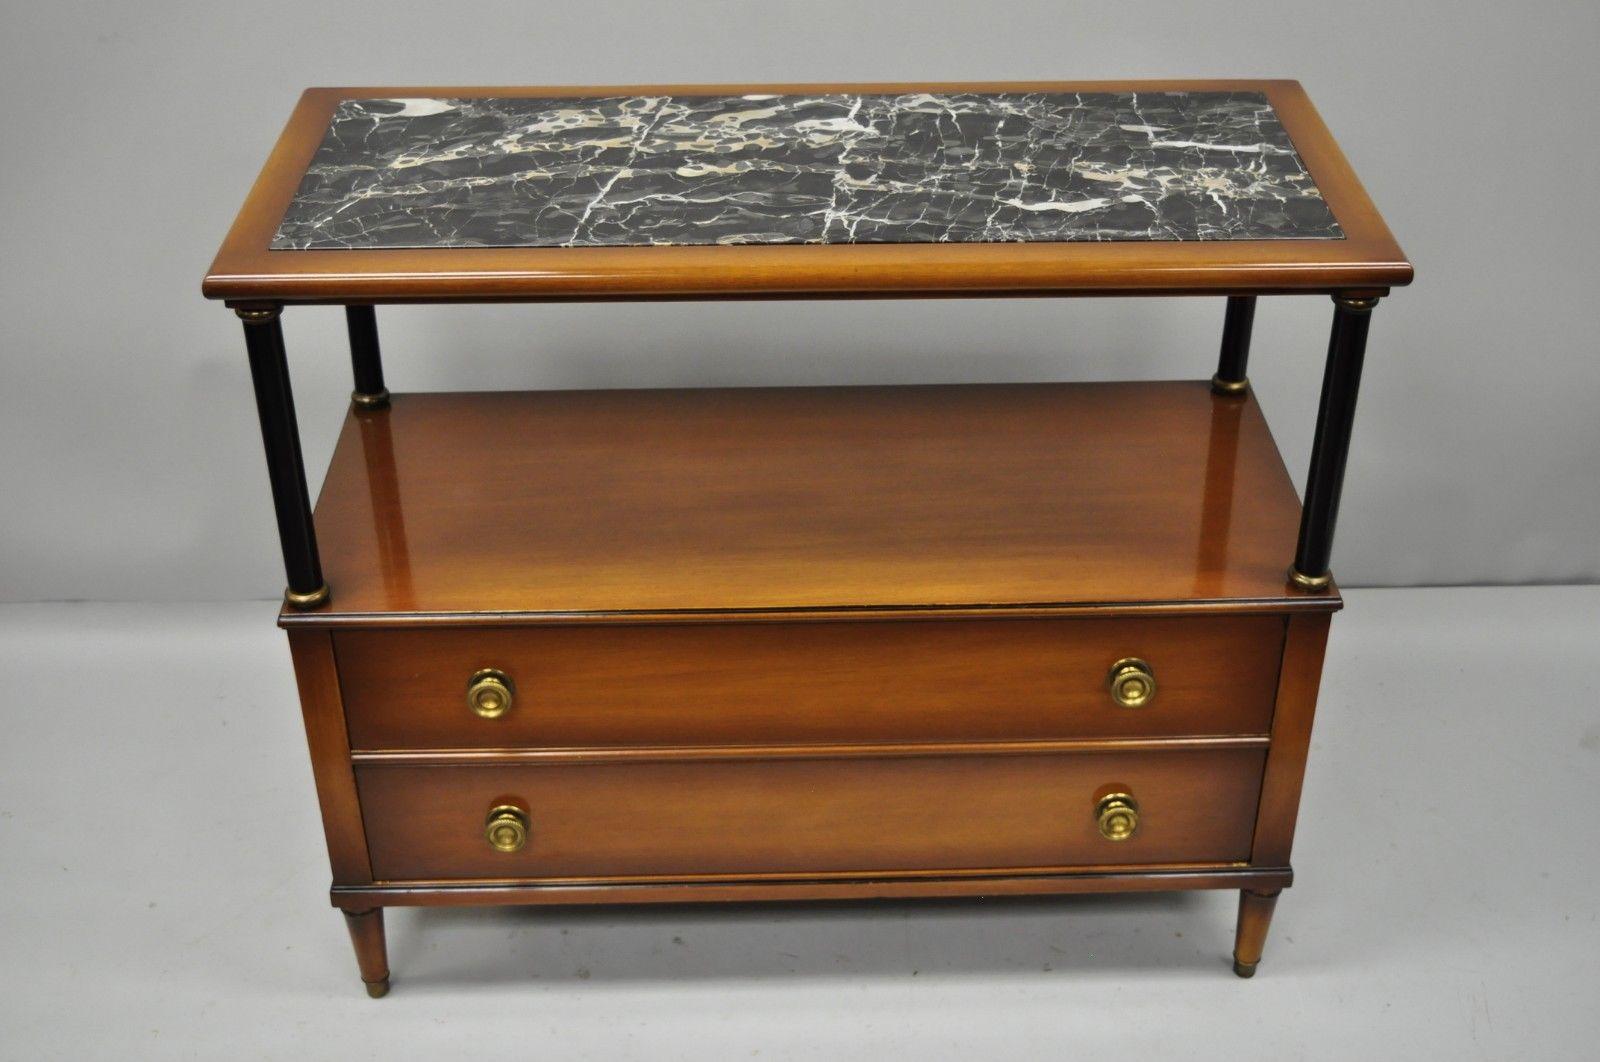 Maslow Freen French Empire style marble top server with black columns. Listing is for a single serving table. Matching server available in another listing. Item features inset marble top, black column support, brass capped feet, original label,